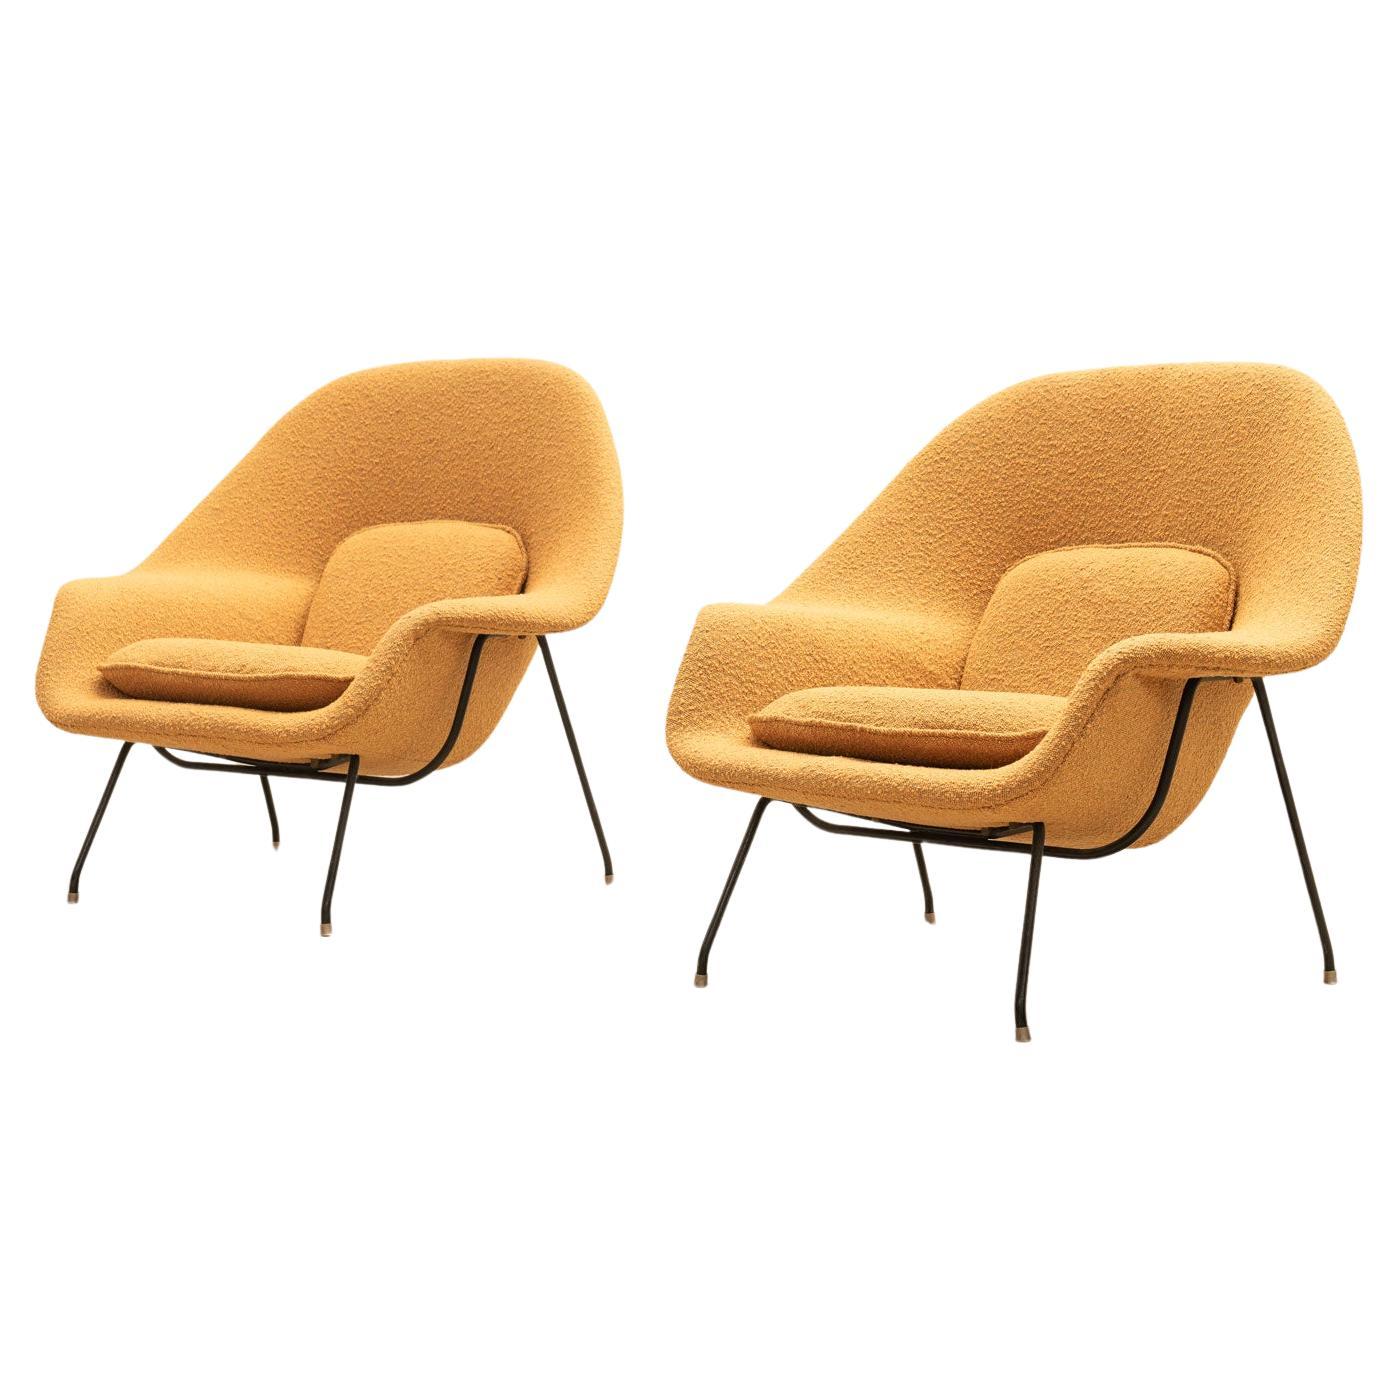 What did Florence Knoll call the Womb chair?